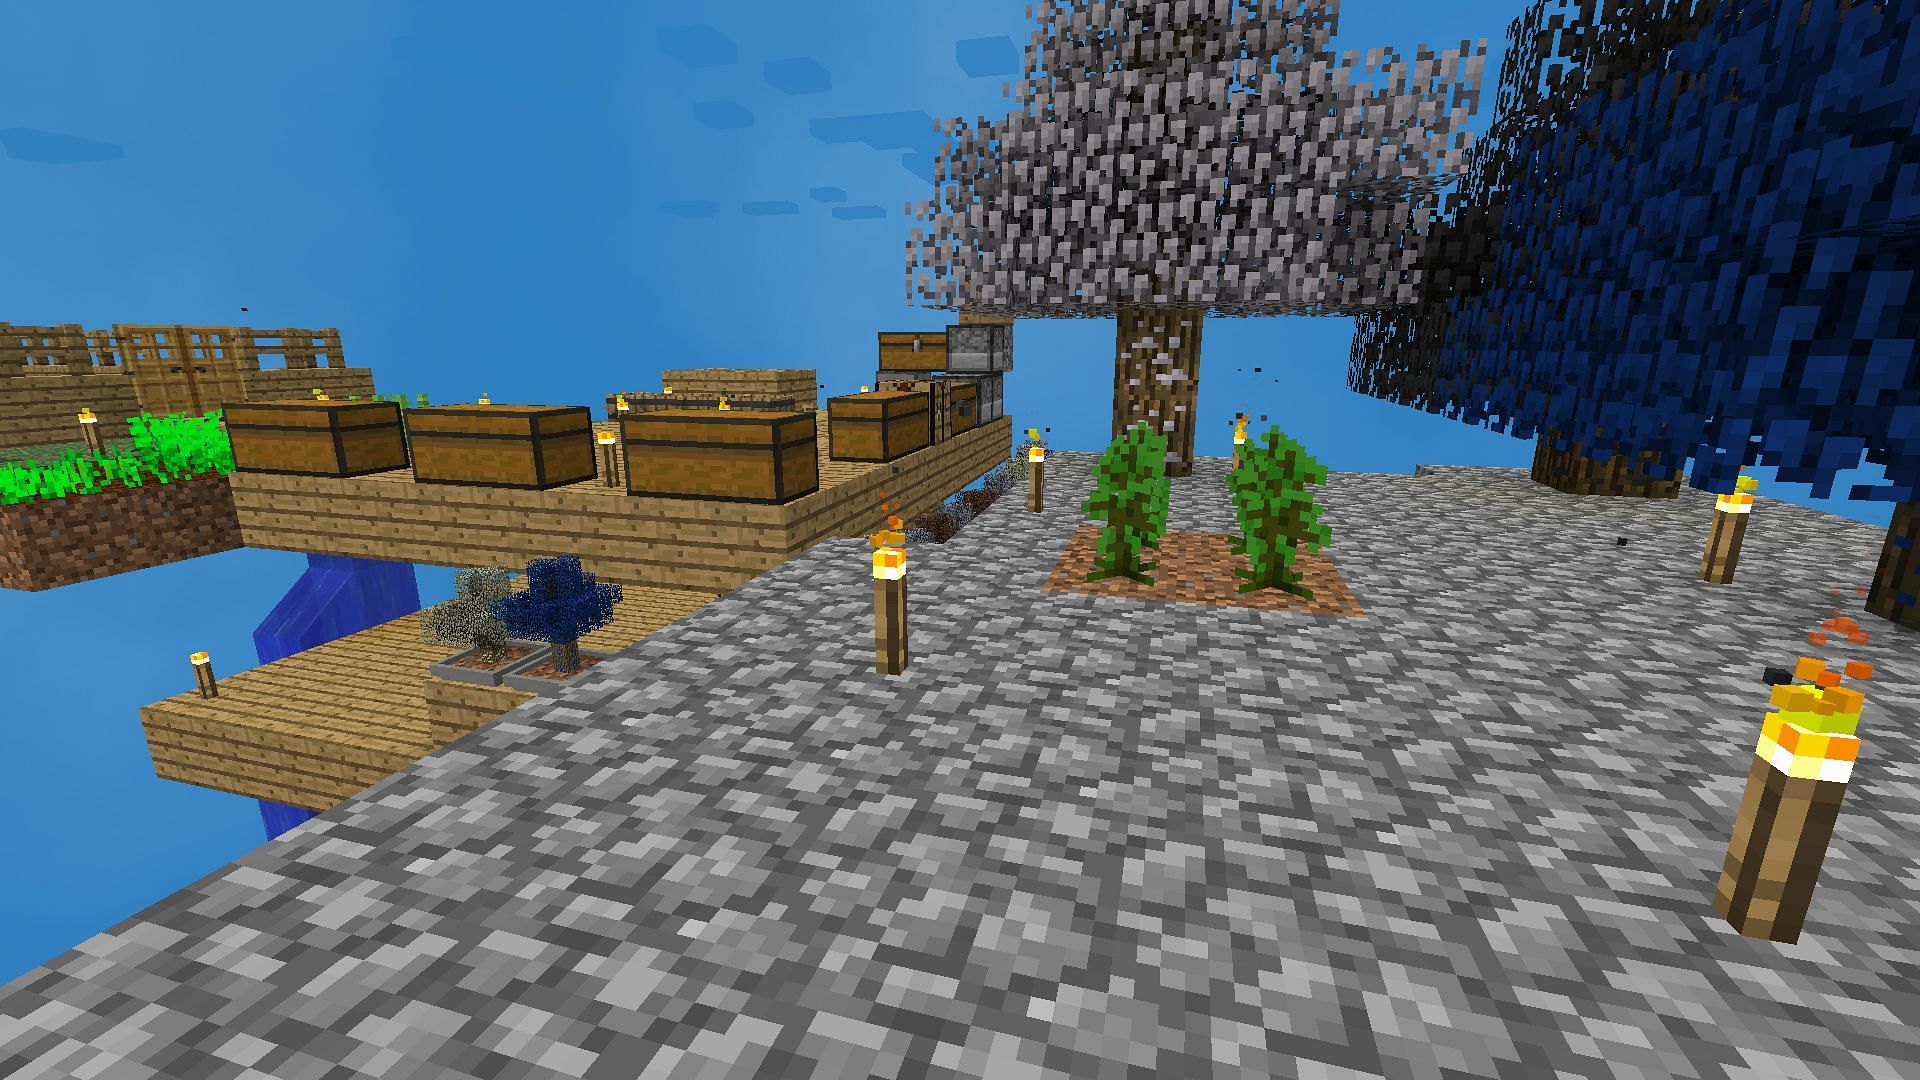 An early base in SkyFactory 4, one of the best known mods for Minecraft (Image via Minecraft)